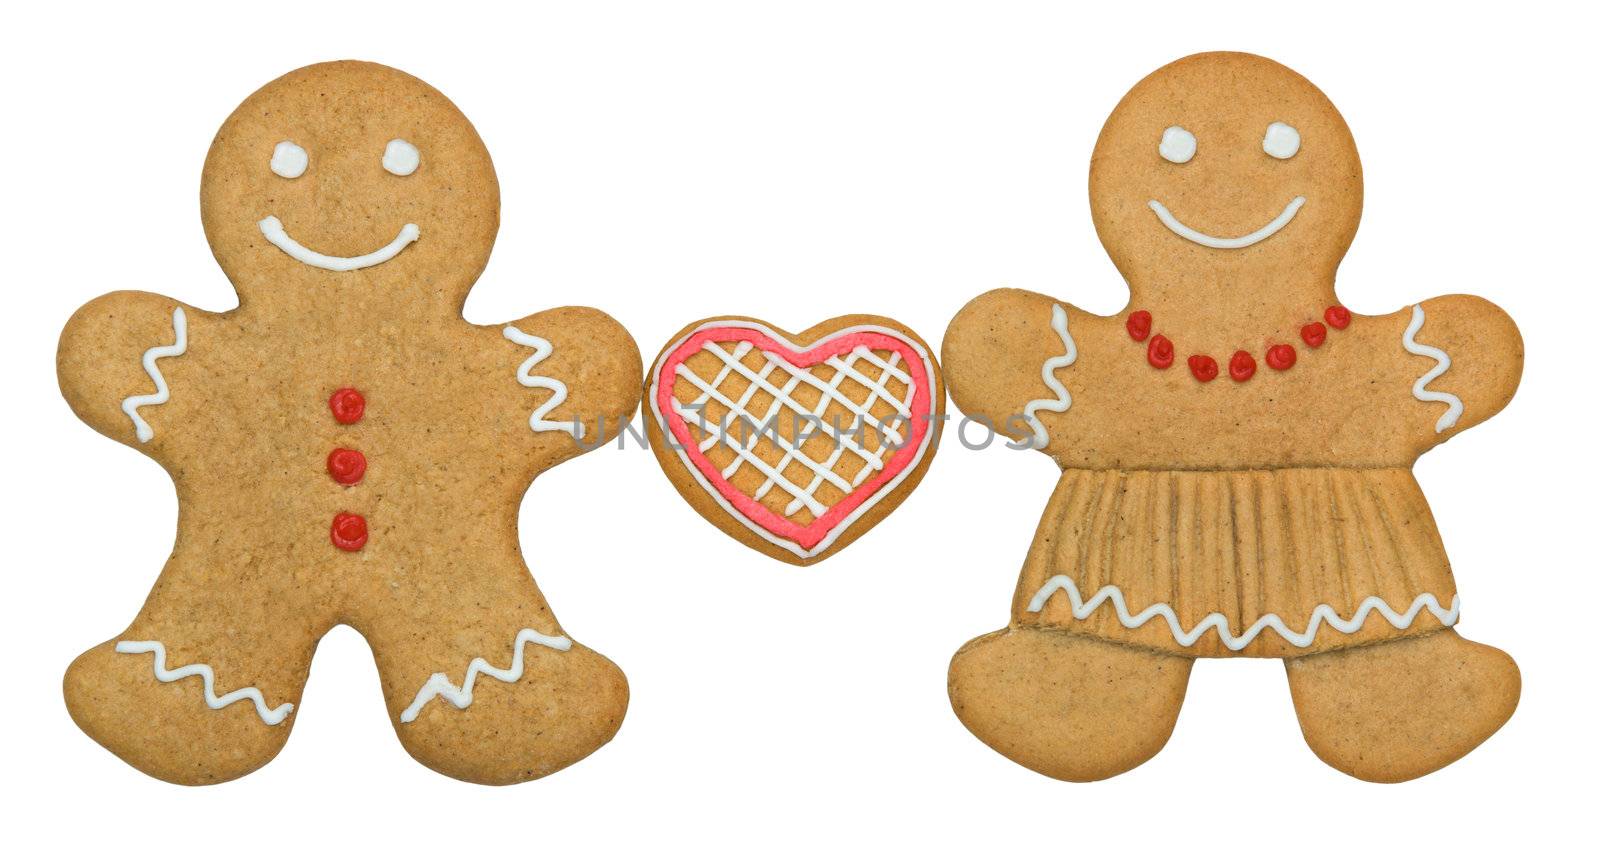 Gingerbread couple holding a heart shaped cookie